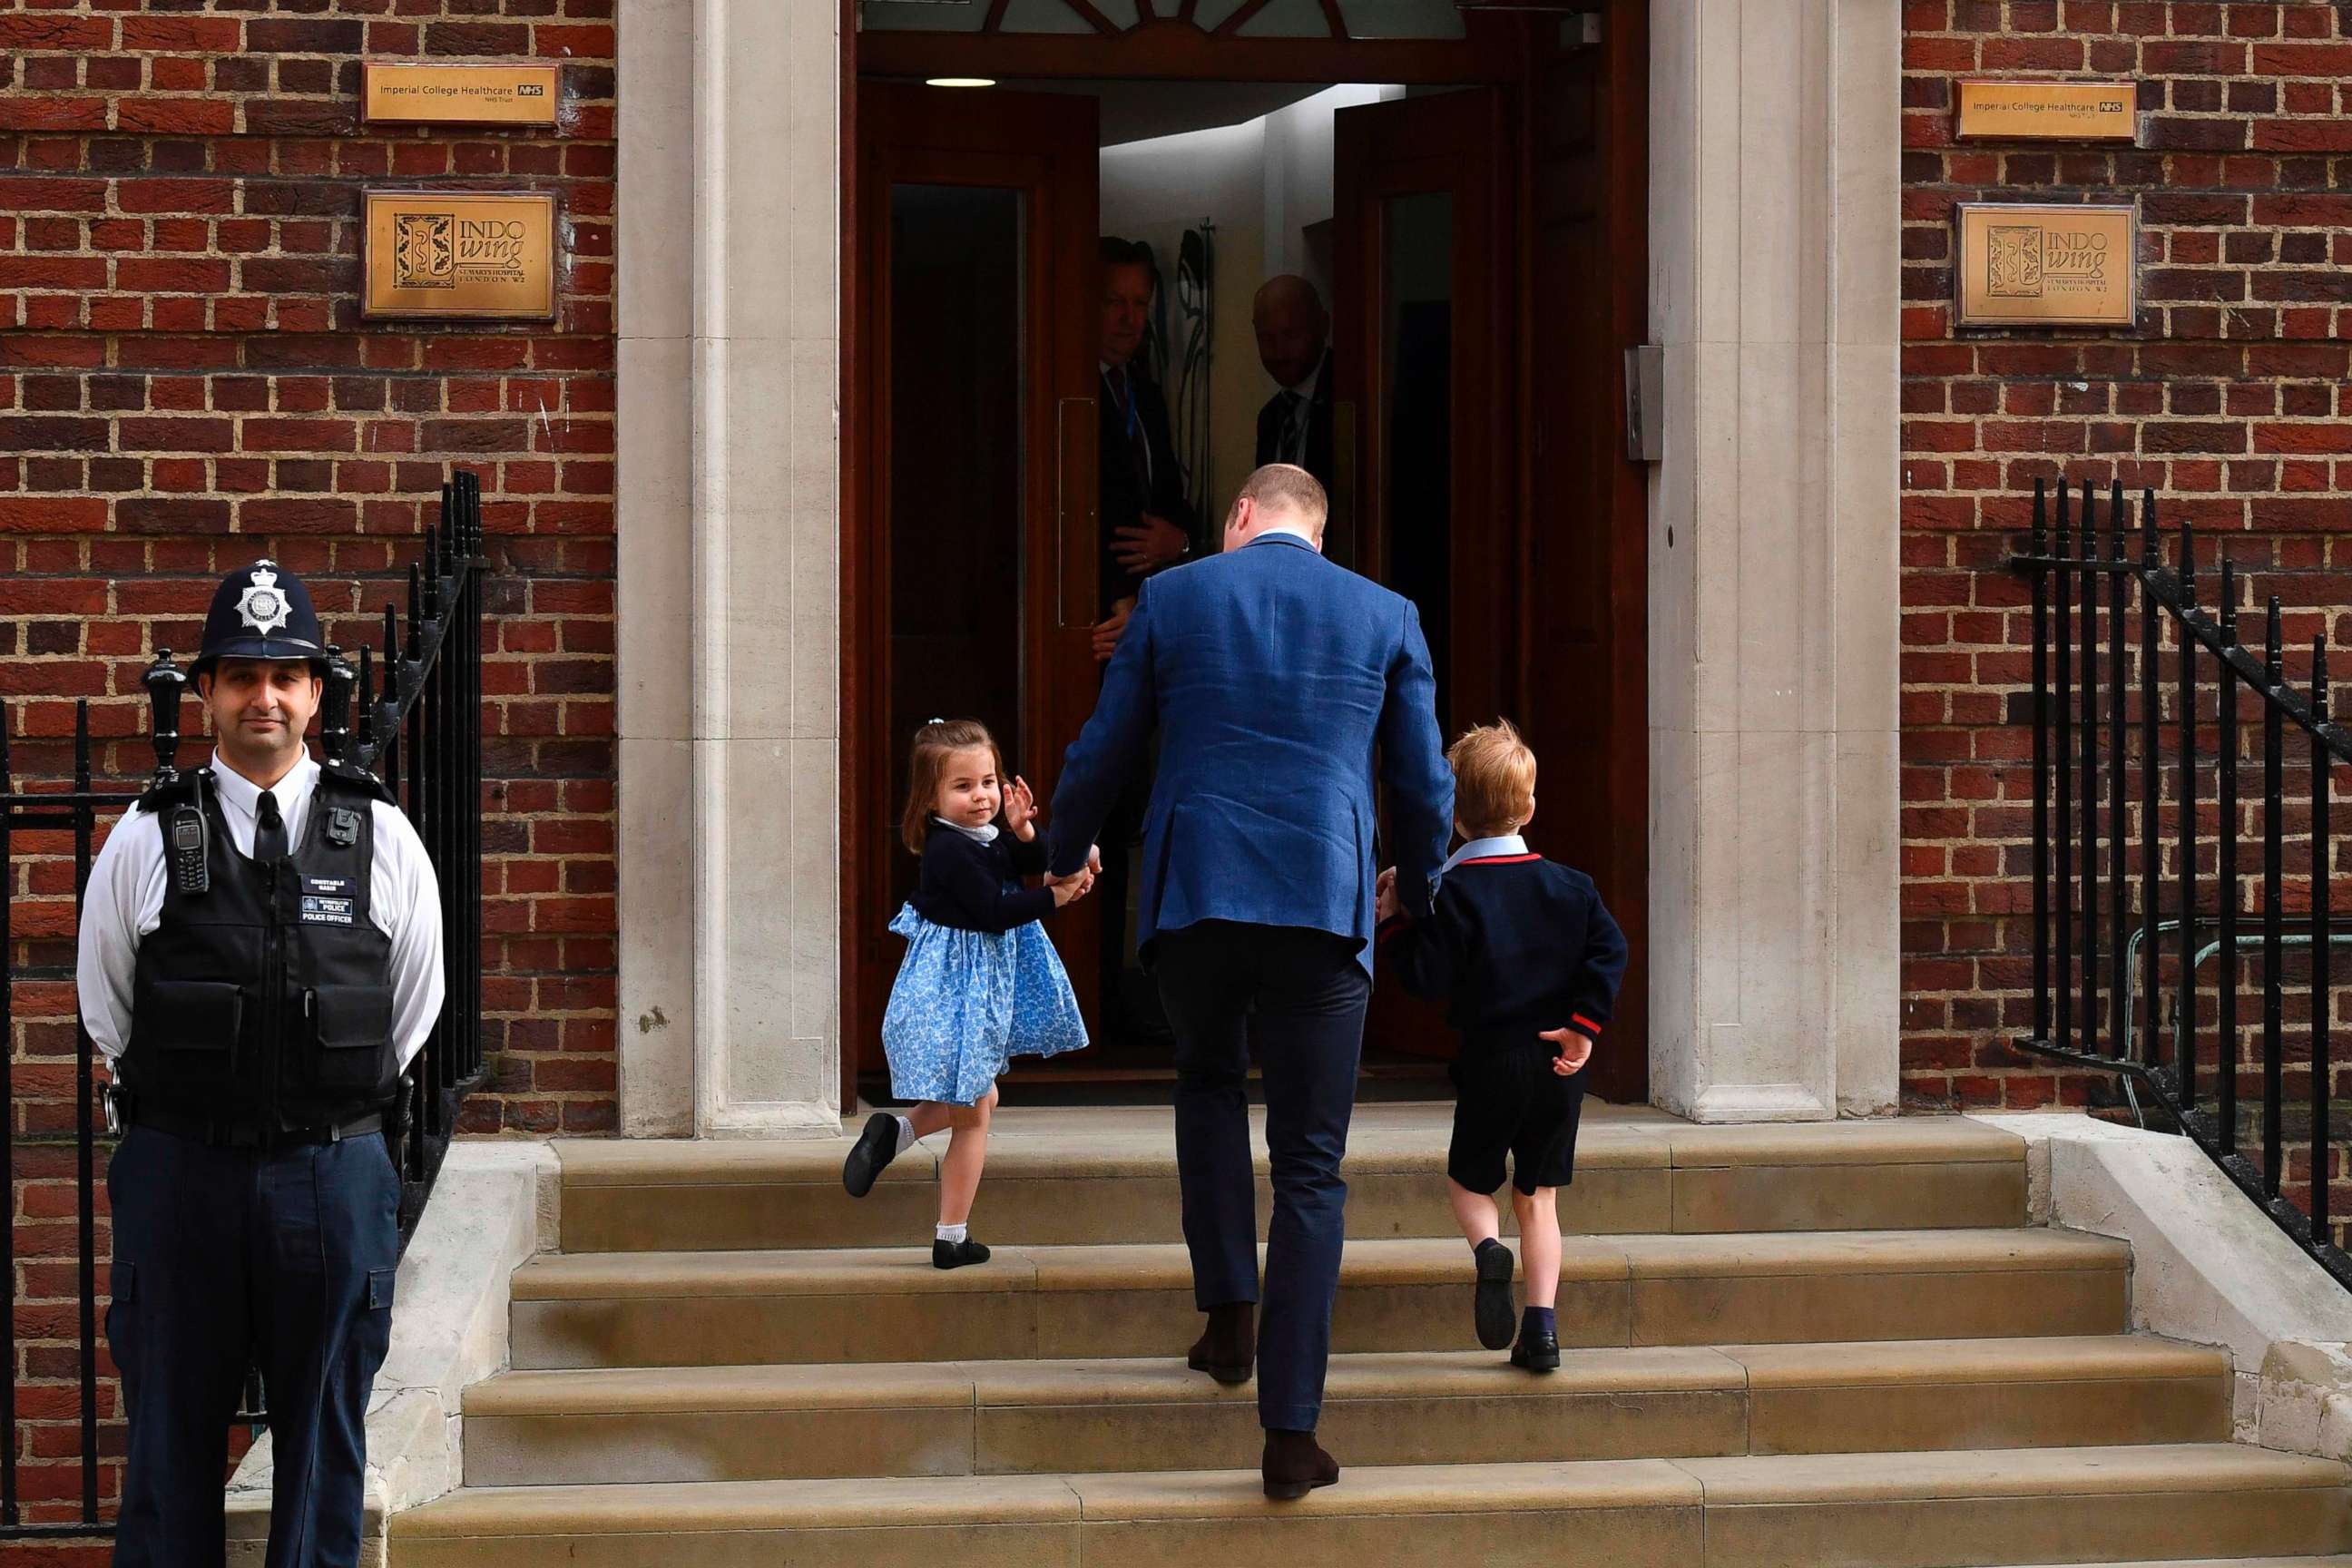 Princess Charlotte of Cambridge, Prince George of Cambridge by their father Britain's Prince William, Duke of Cambridge, at the Lindo Wing of St Mary's Hospital in London, April 23, 2018, to visit Catherine, Duchess of Cambridge, and their new-born son.